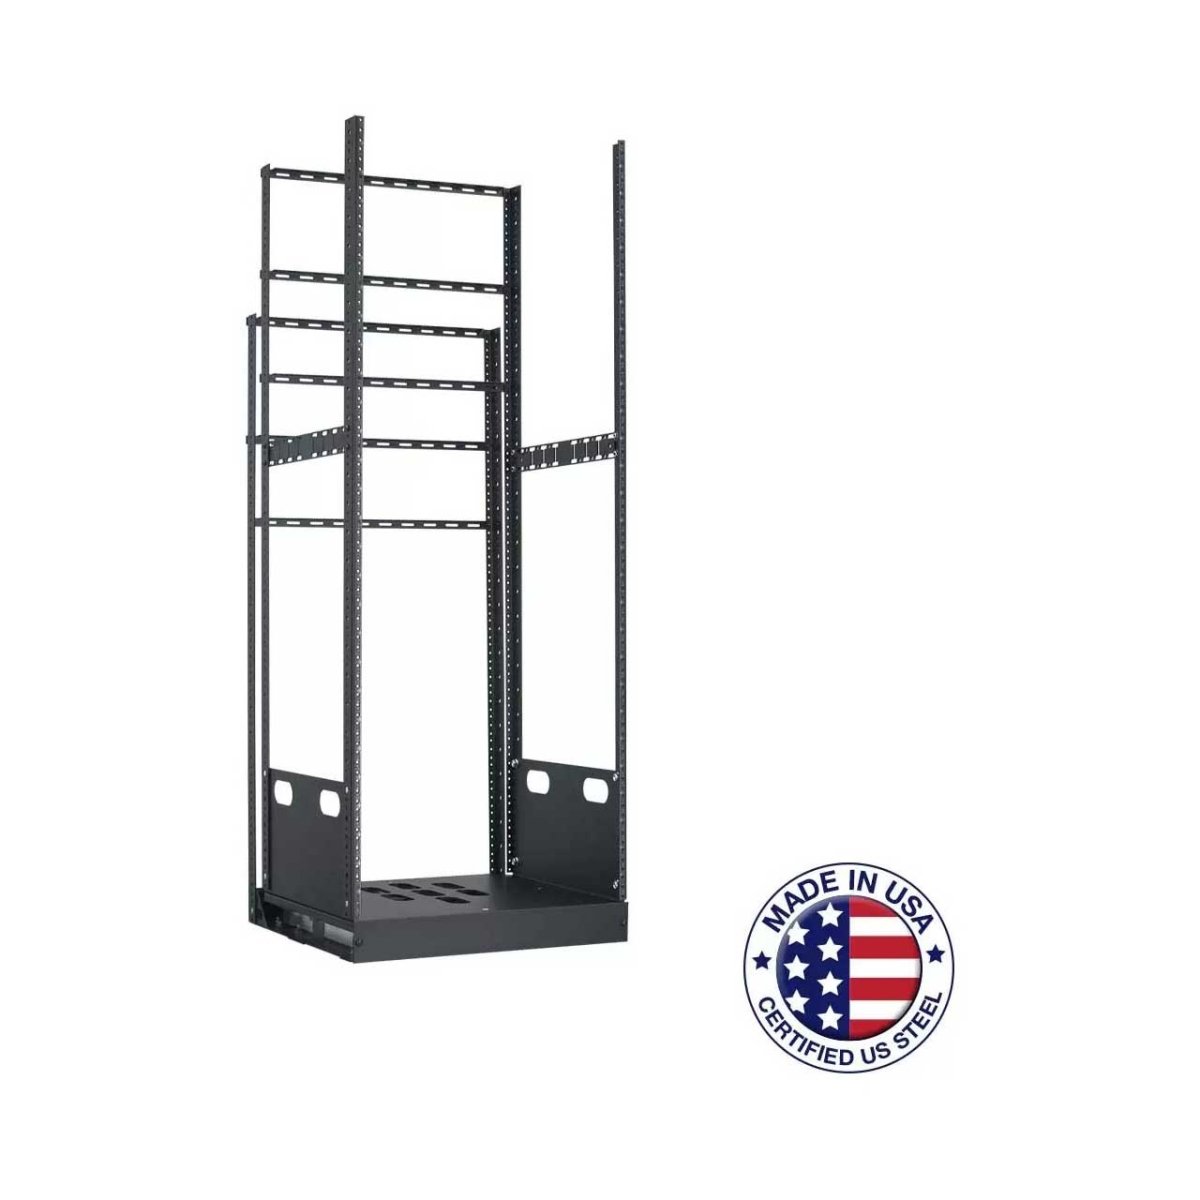 Picture of Lowell Manufacturing LMC-LPTR4-2819 LPTR4-2819 28RU Pull & Turn Millwork Rack with Four Support Rails - 19 in. Deep